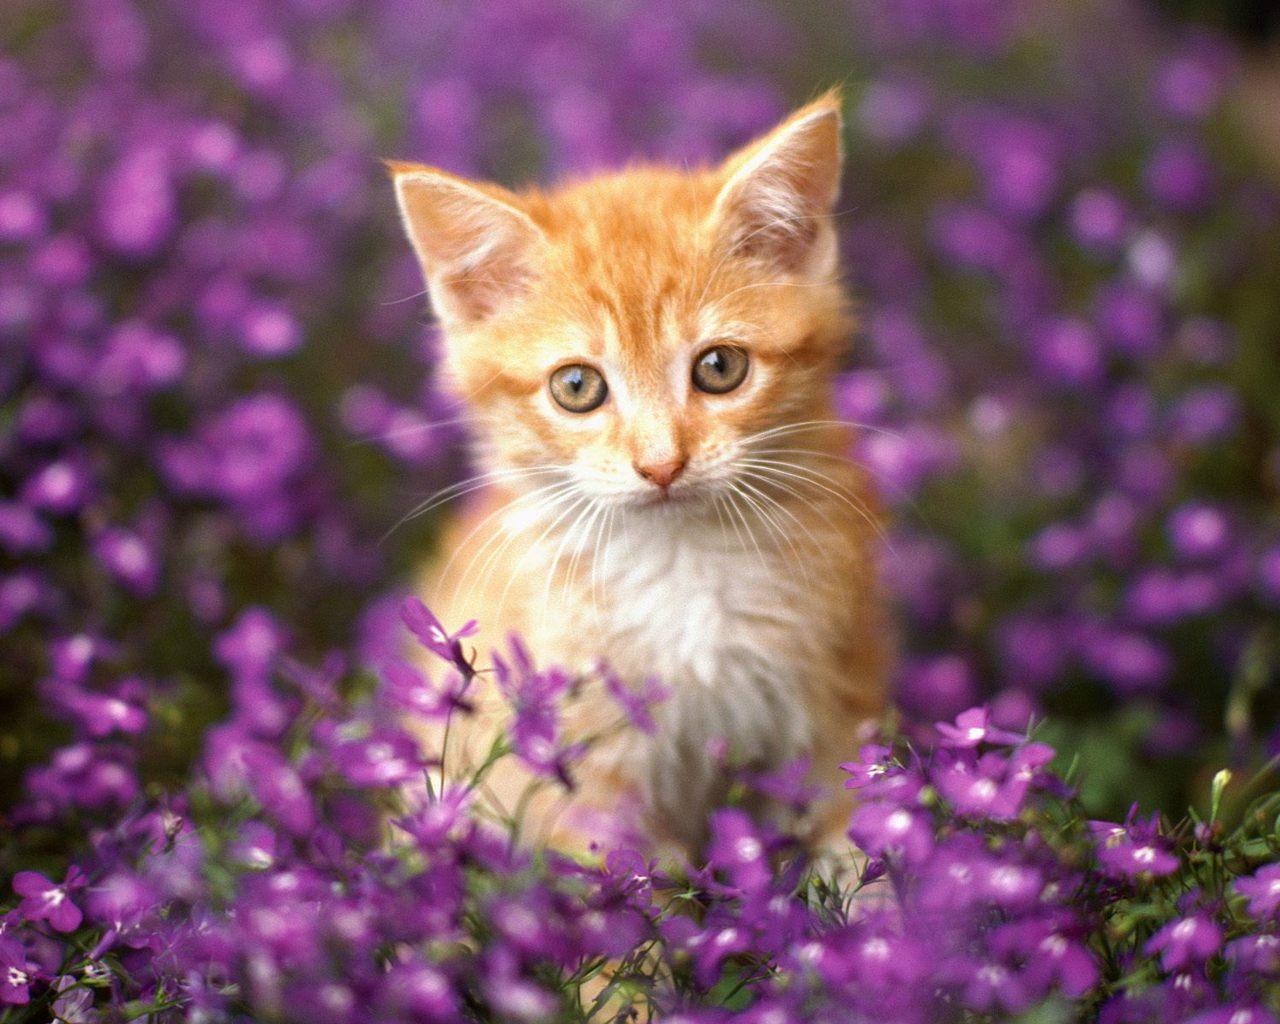 Cat With Flower Background Image and Wallpaper